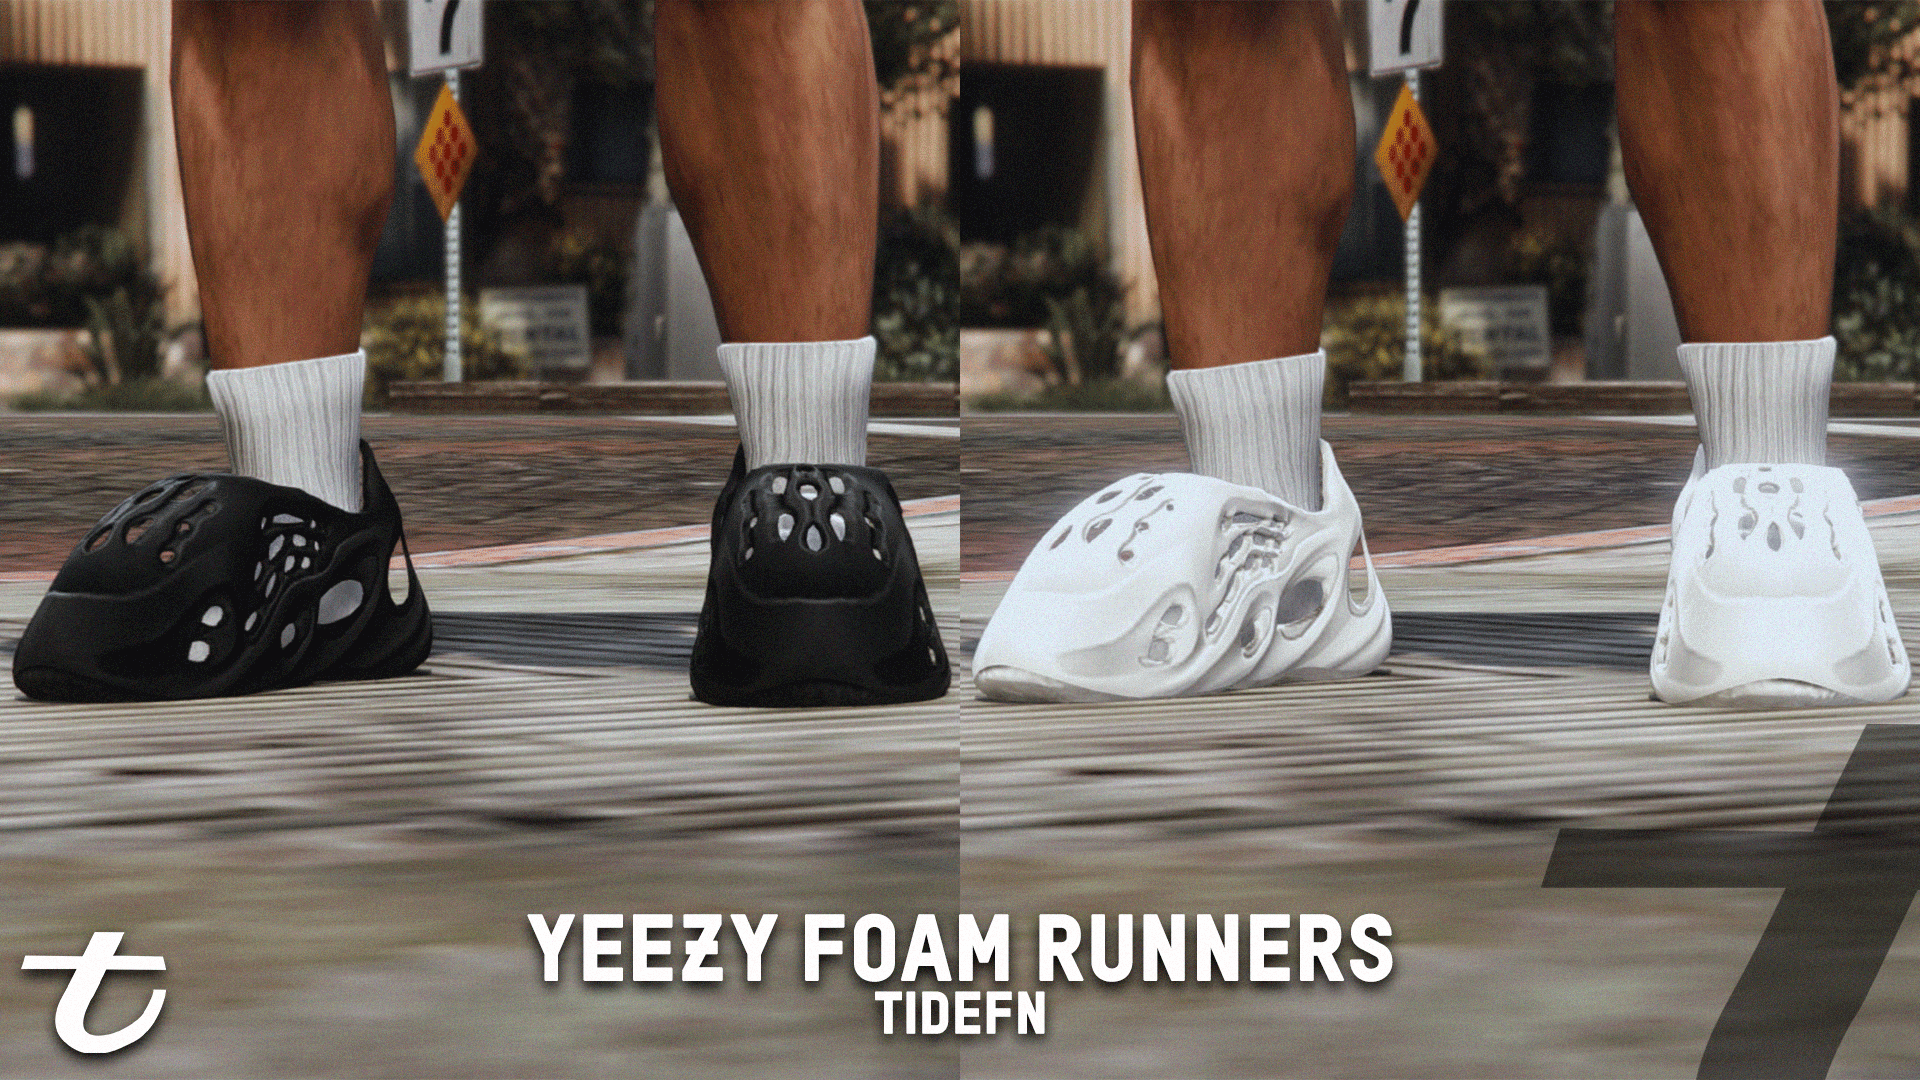 Yeezy Foam Runners The Sims Download | vlr.eng.br